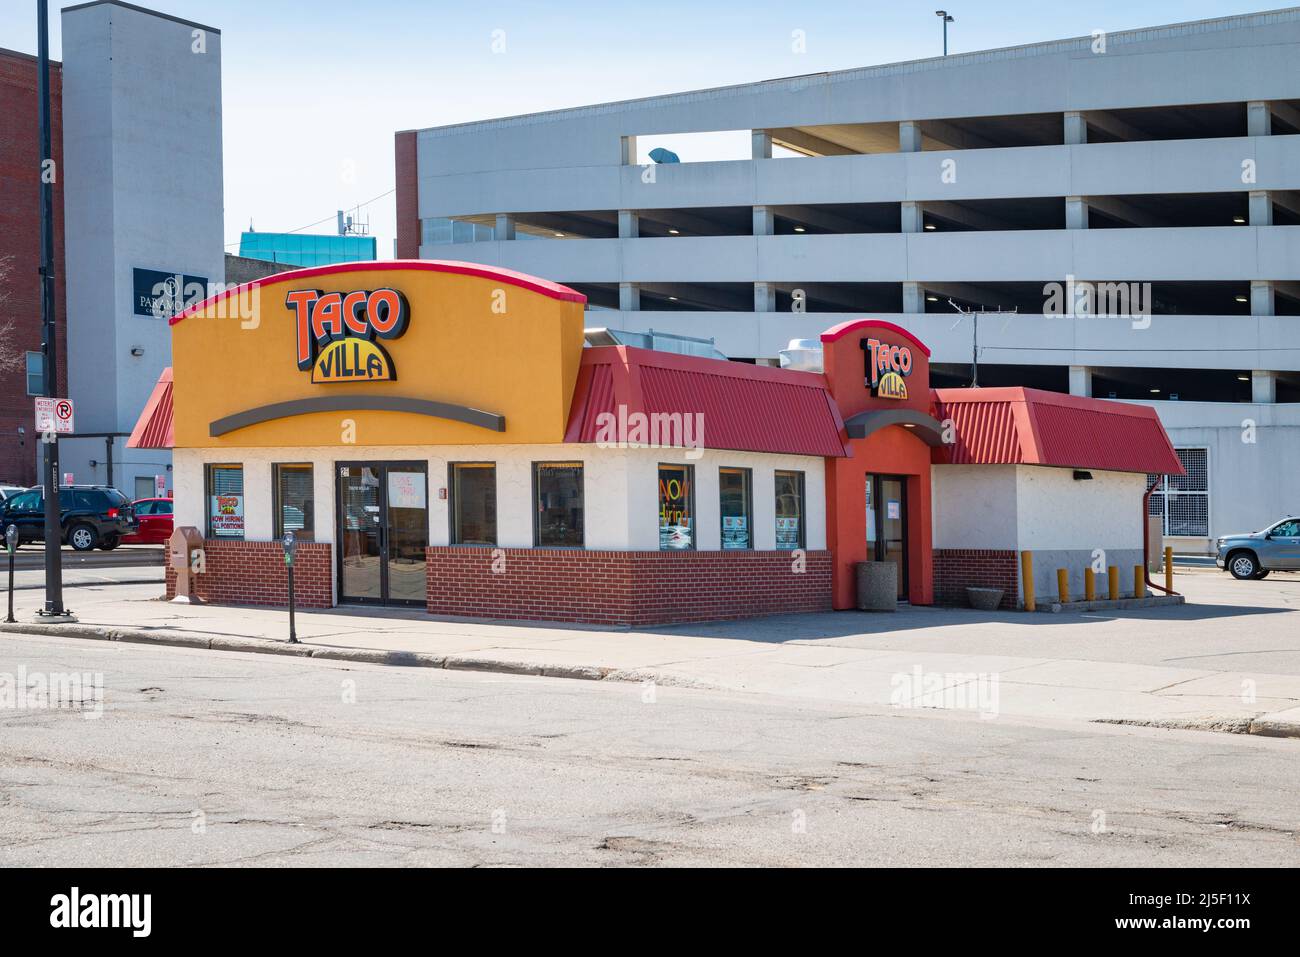 SAINT CLOUD, MINNESOTA - February 19, 2022: Taco Villa, located at 25 9th Ave N., is photographed. Stock Photo